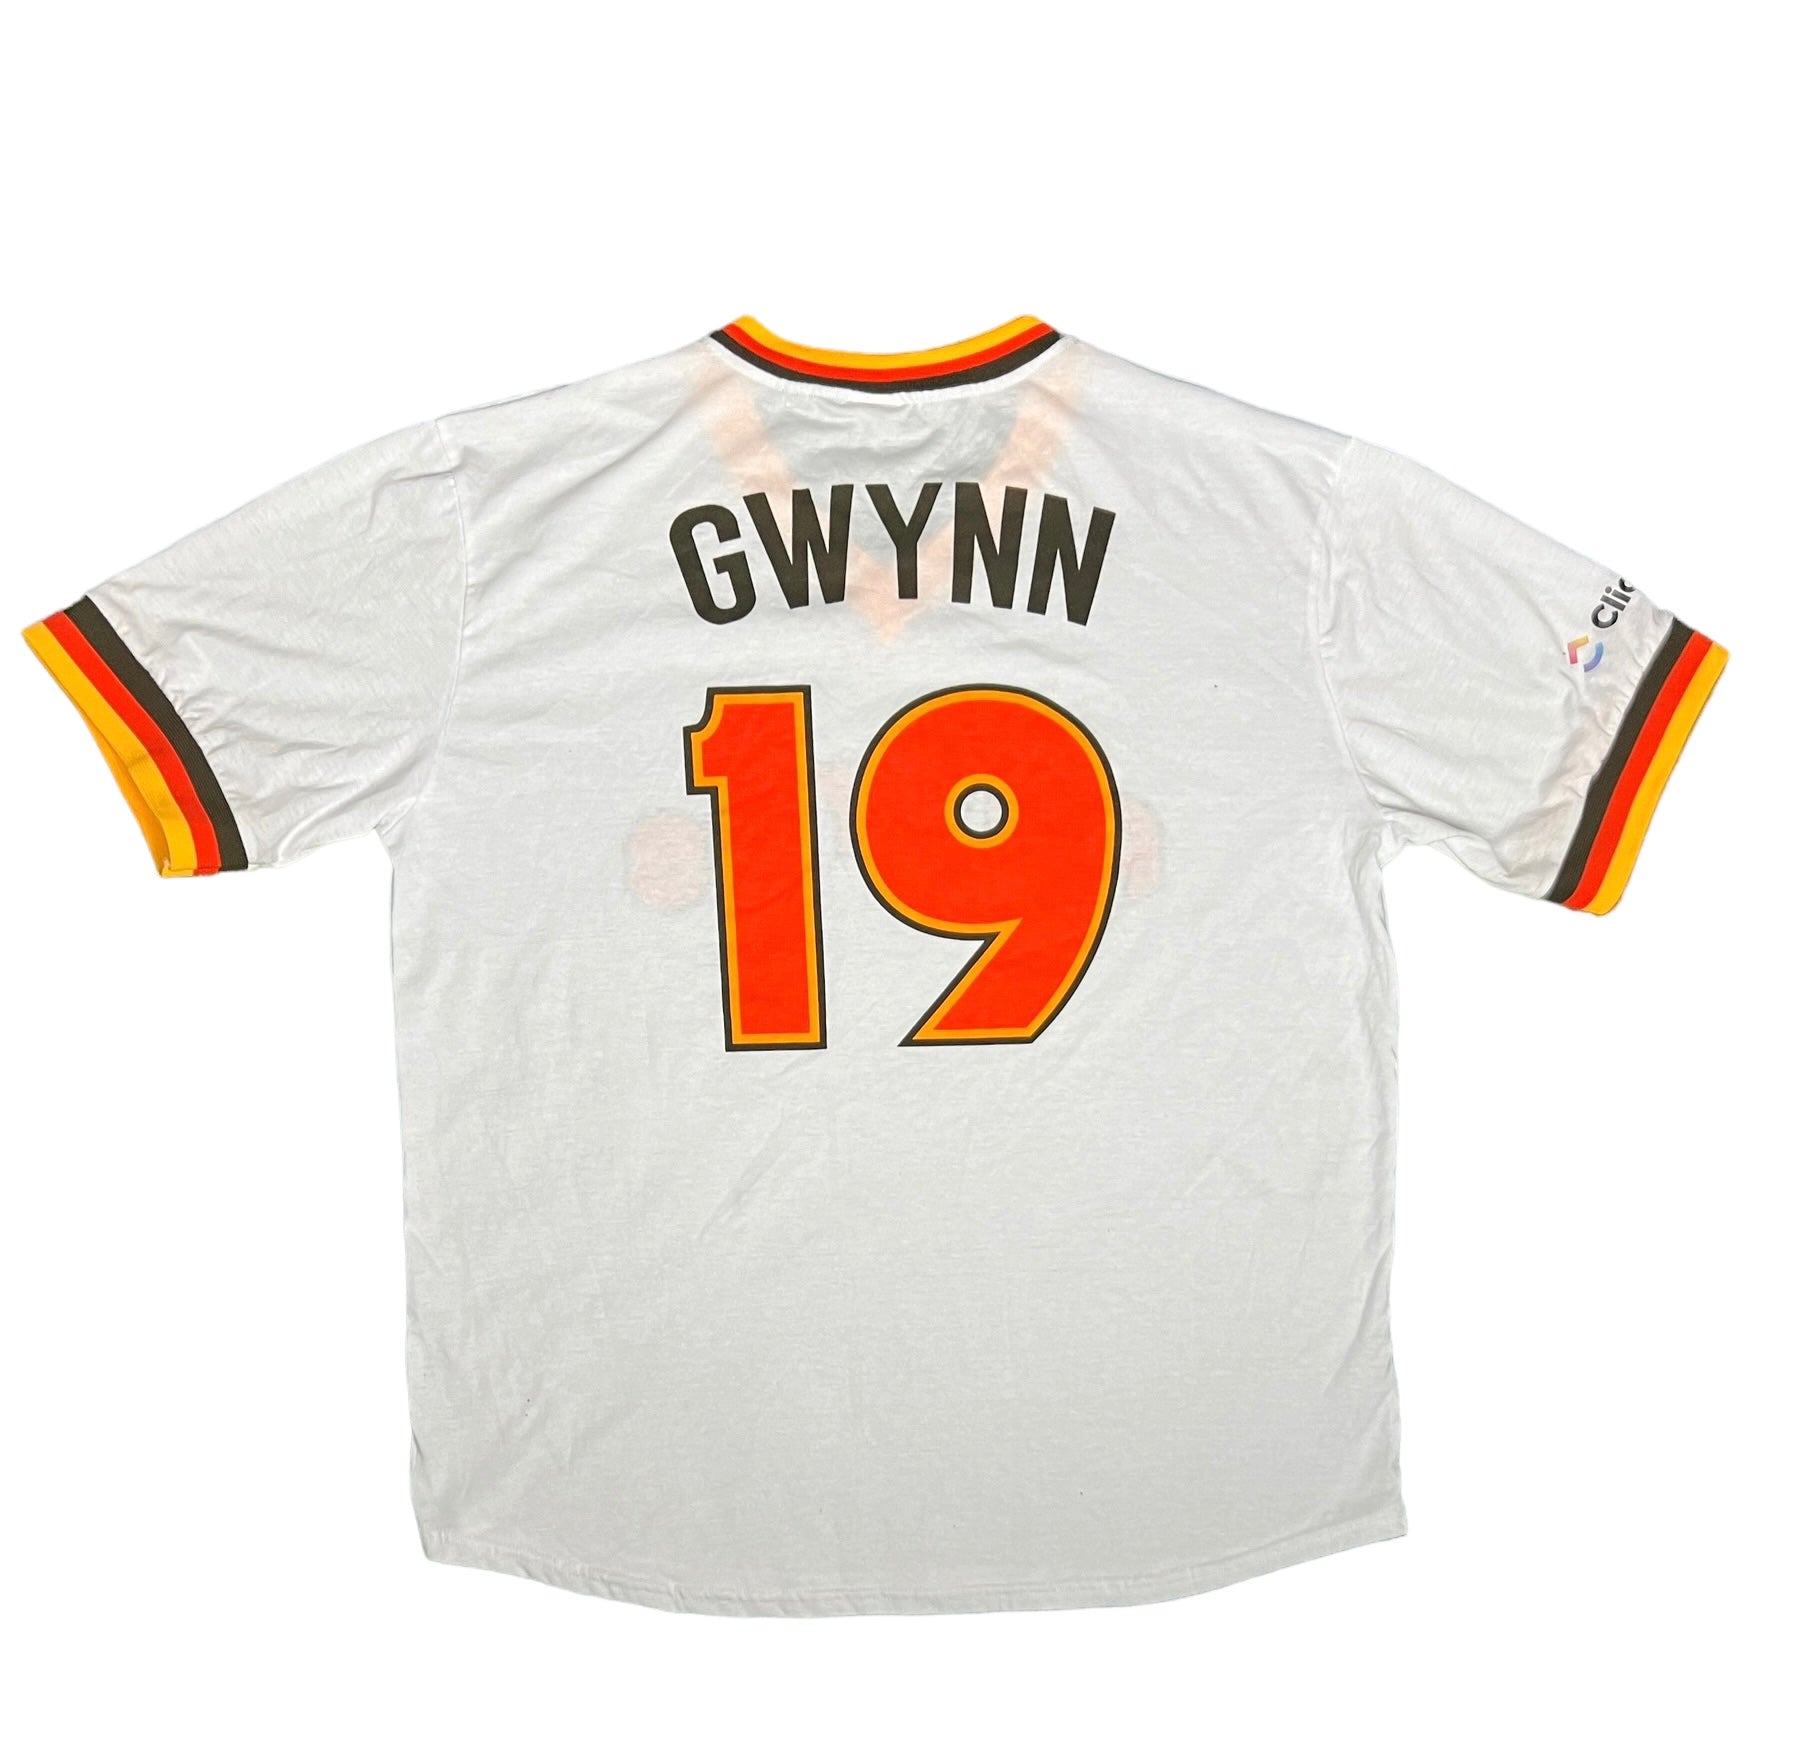 MLB Padres 19 Tony Gwynn Mitchell and Ness Throwback Men Jersey